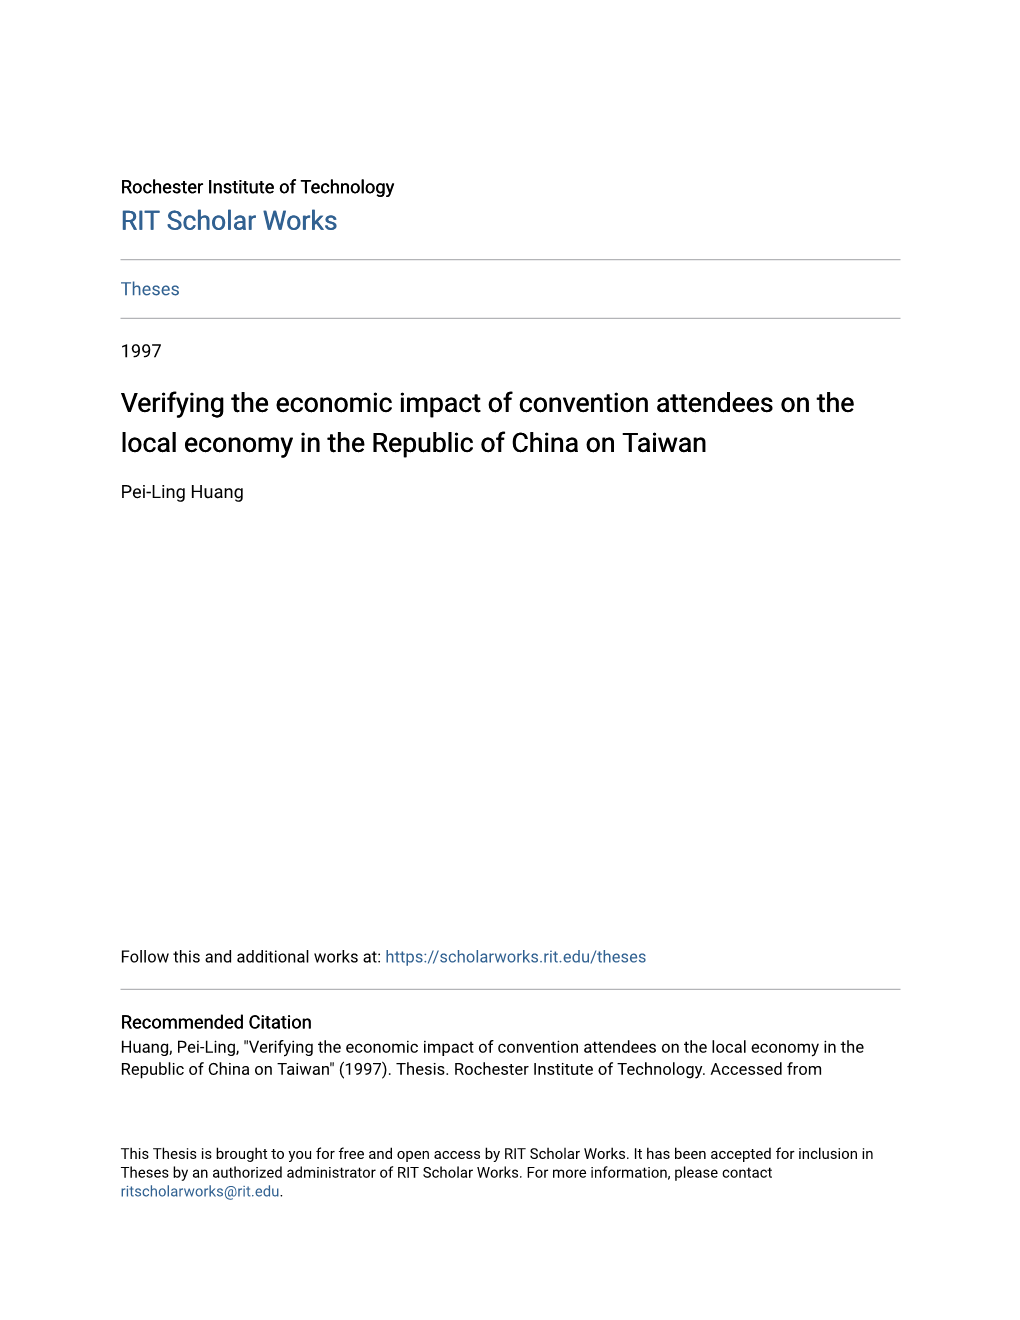 Verifying the Economic Impact of Convention Attendees on the Local Economy in the Republic of China on Taiwan